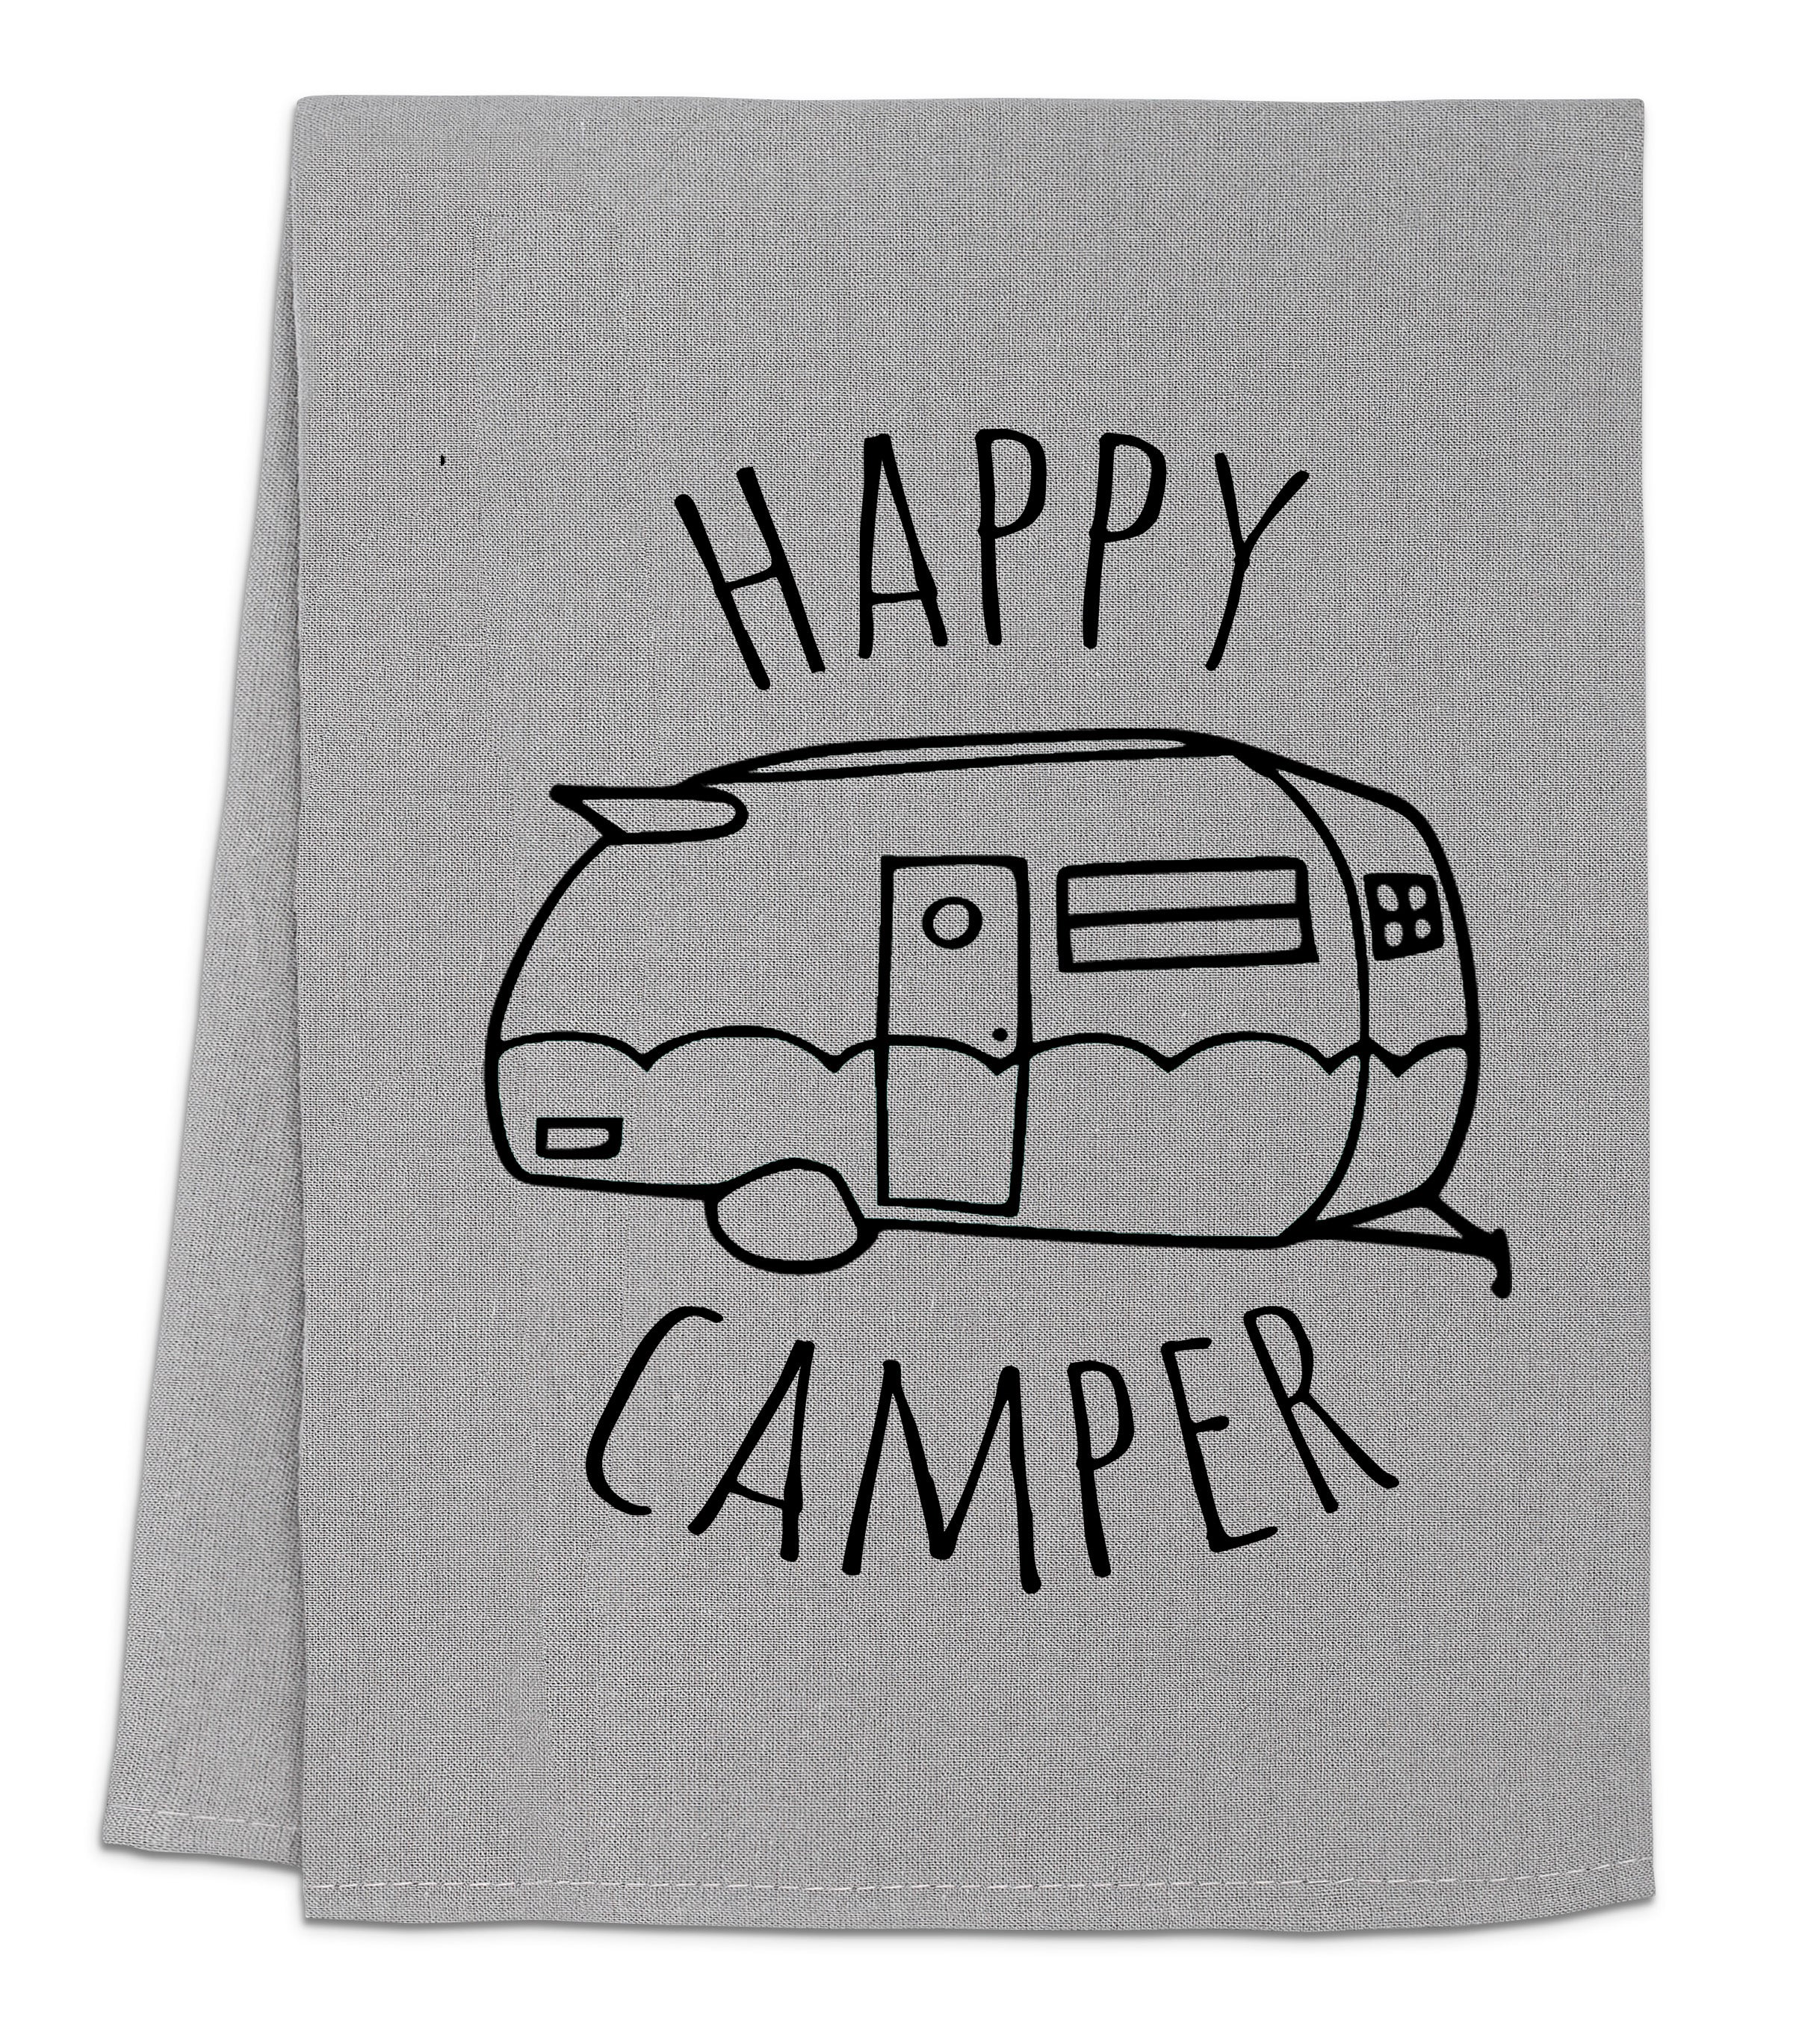 Set of 6 Camping Kitchen Towels White Absorbent Dish Towels Bonfire Tent  Car Tea Towels 24 x 16 Inches with Funny Sayings Novelty Gifts for Campers